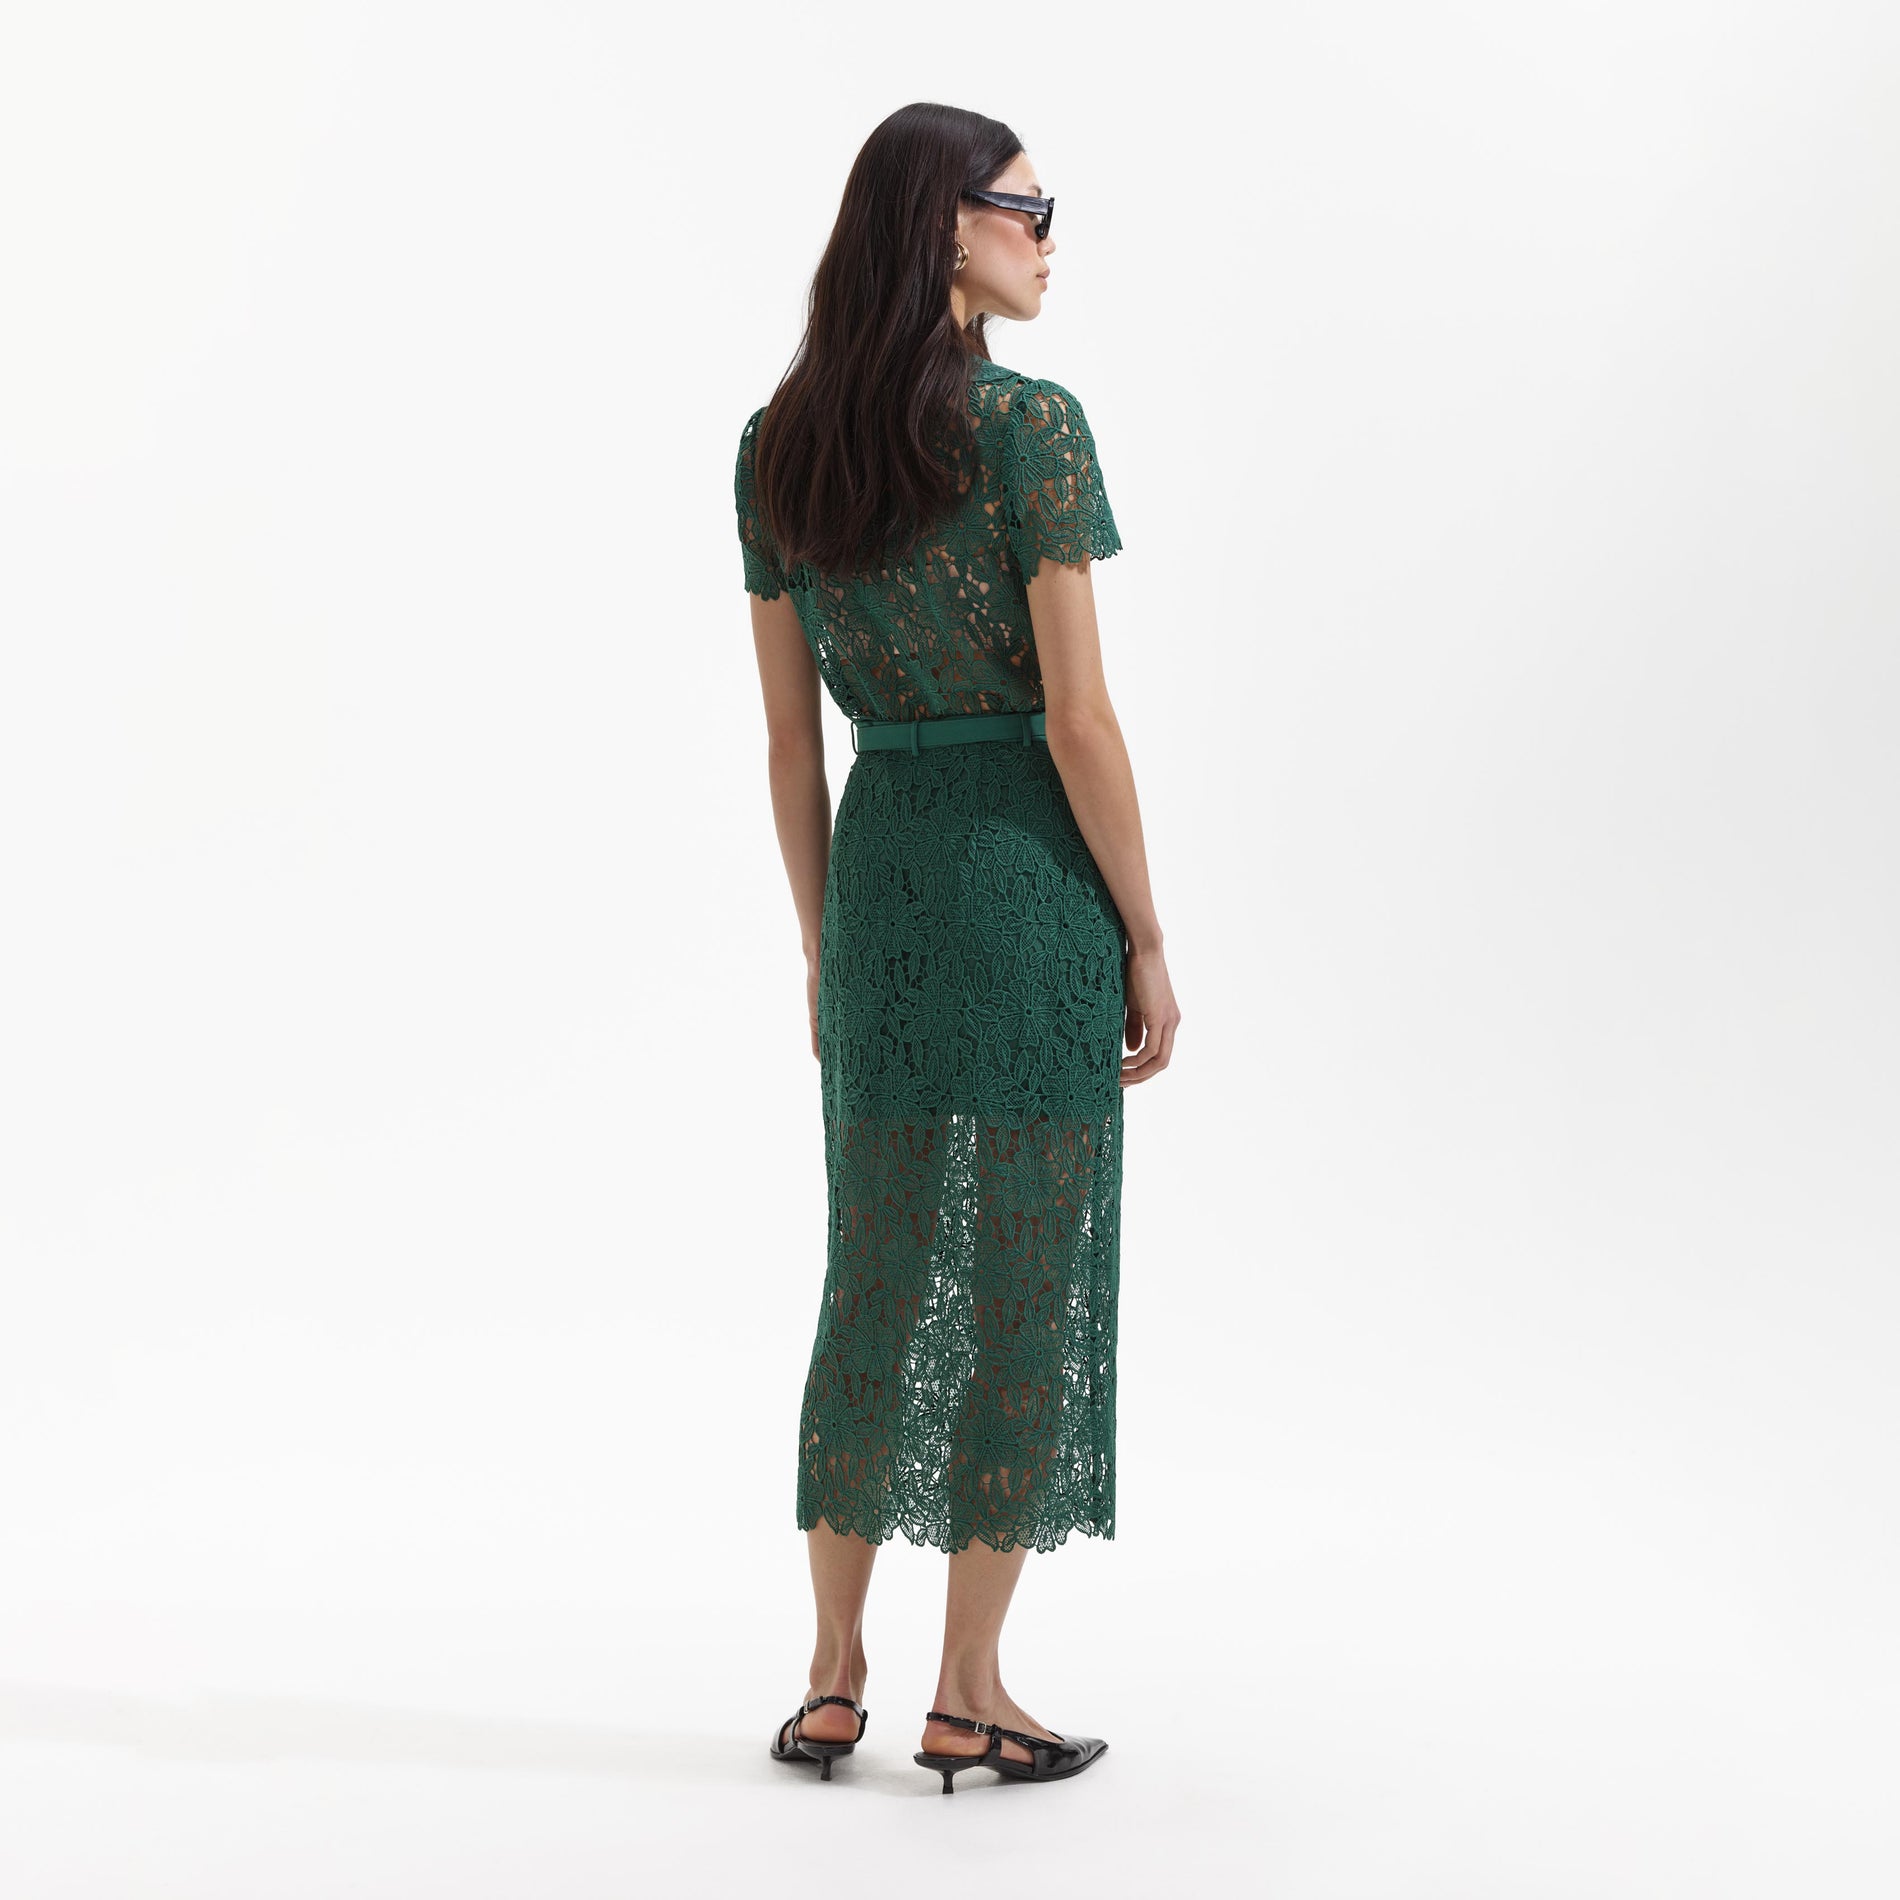 A Woman wearing the Green Guipure Lace Top